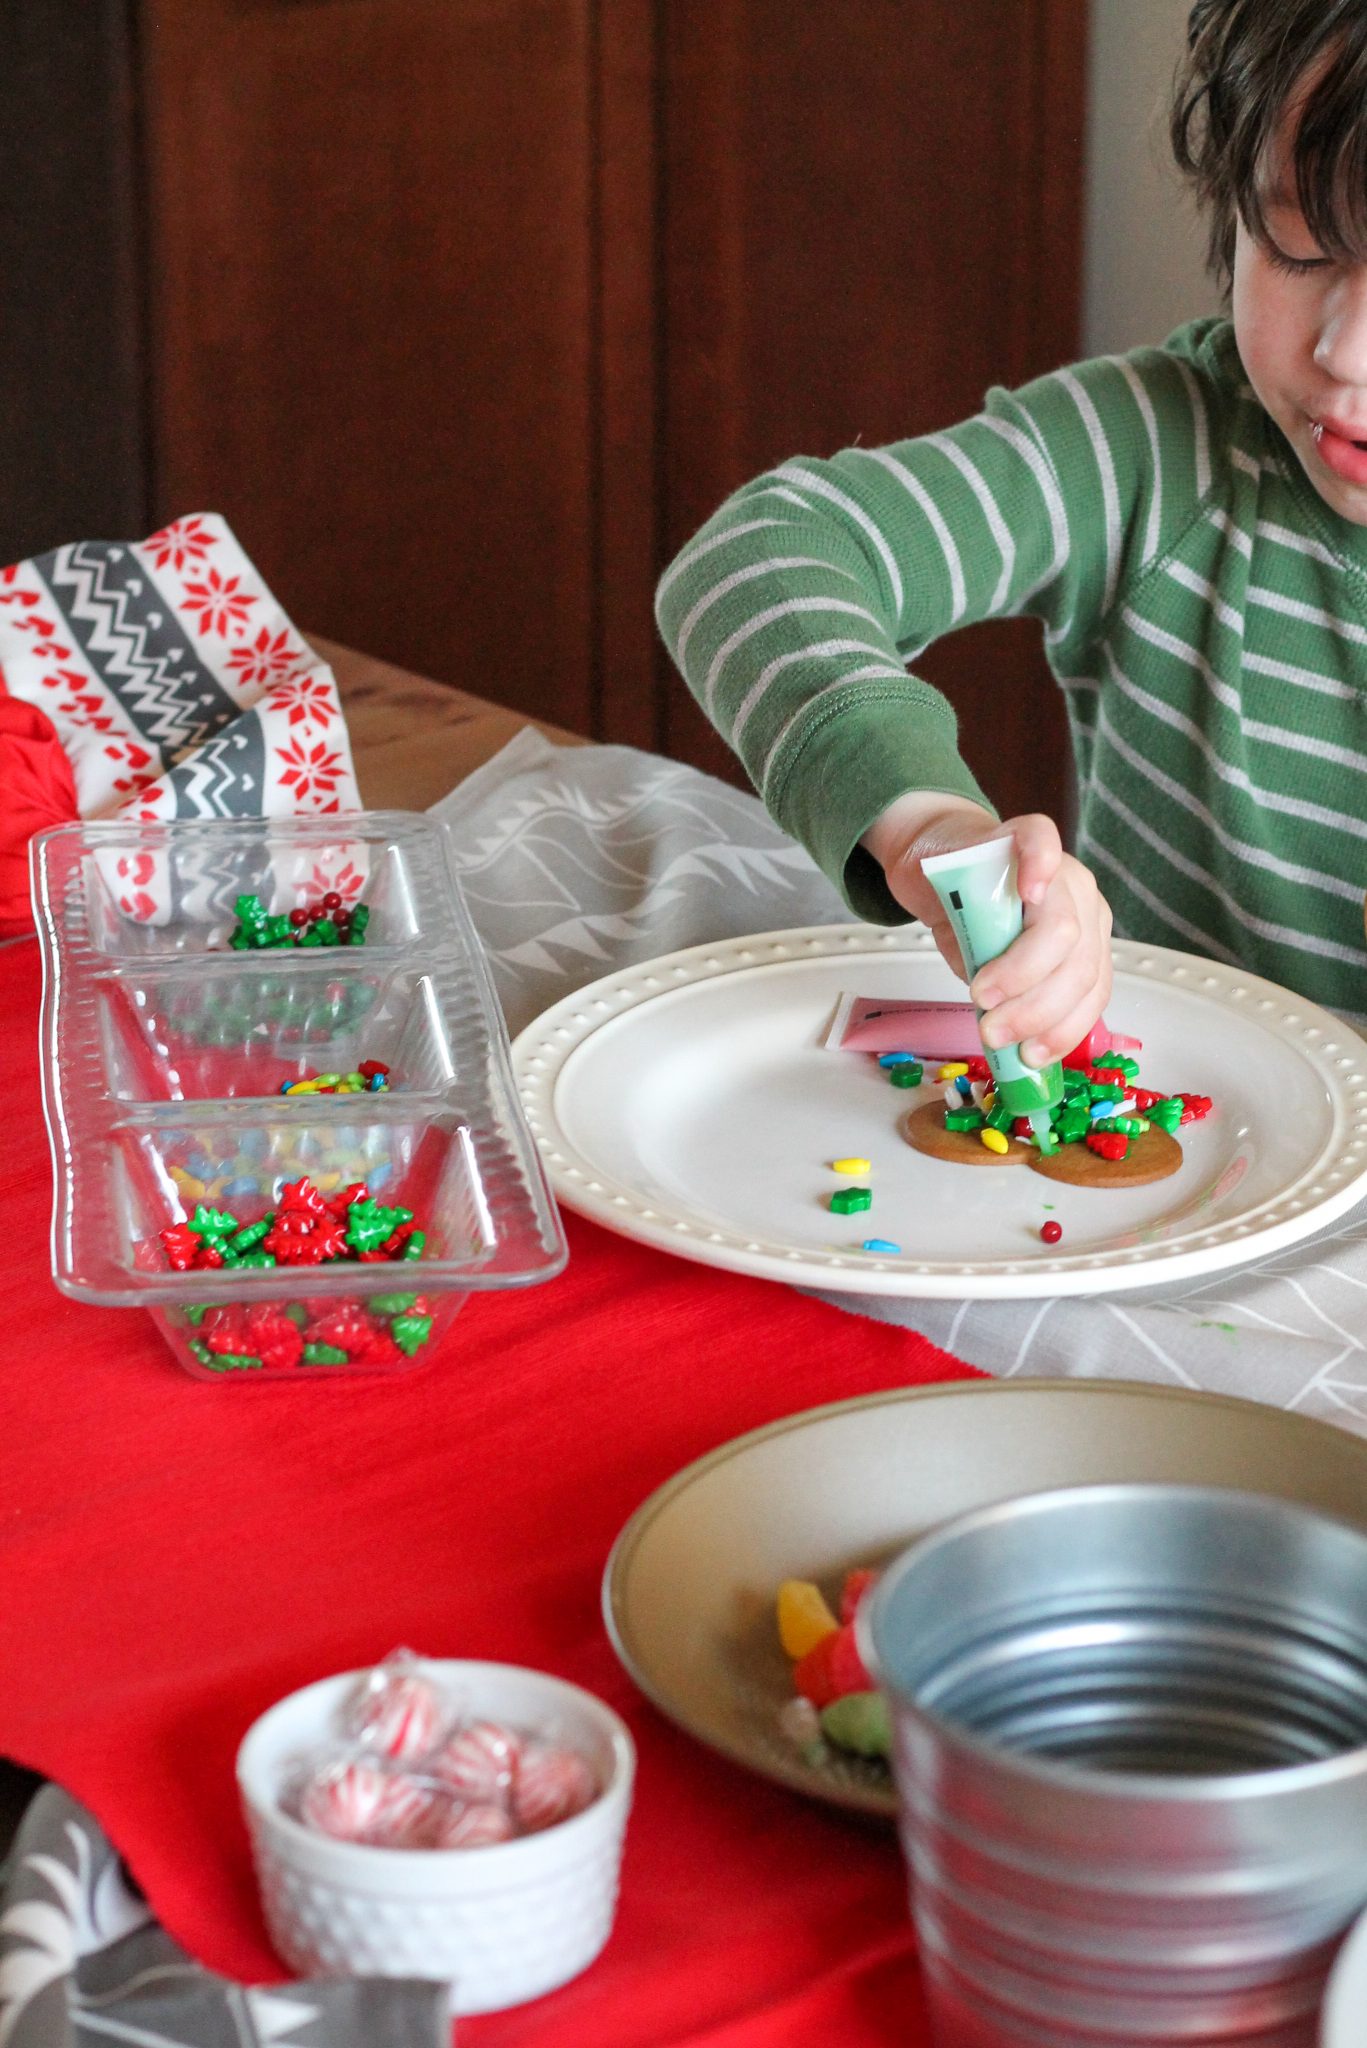 5 Easy Ways to Make Holiday Memories with Your Kids